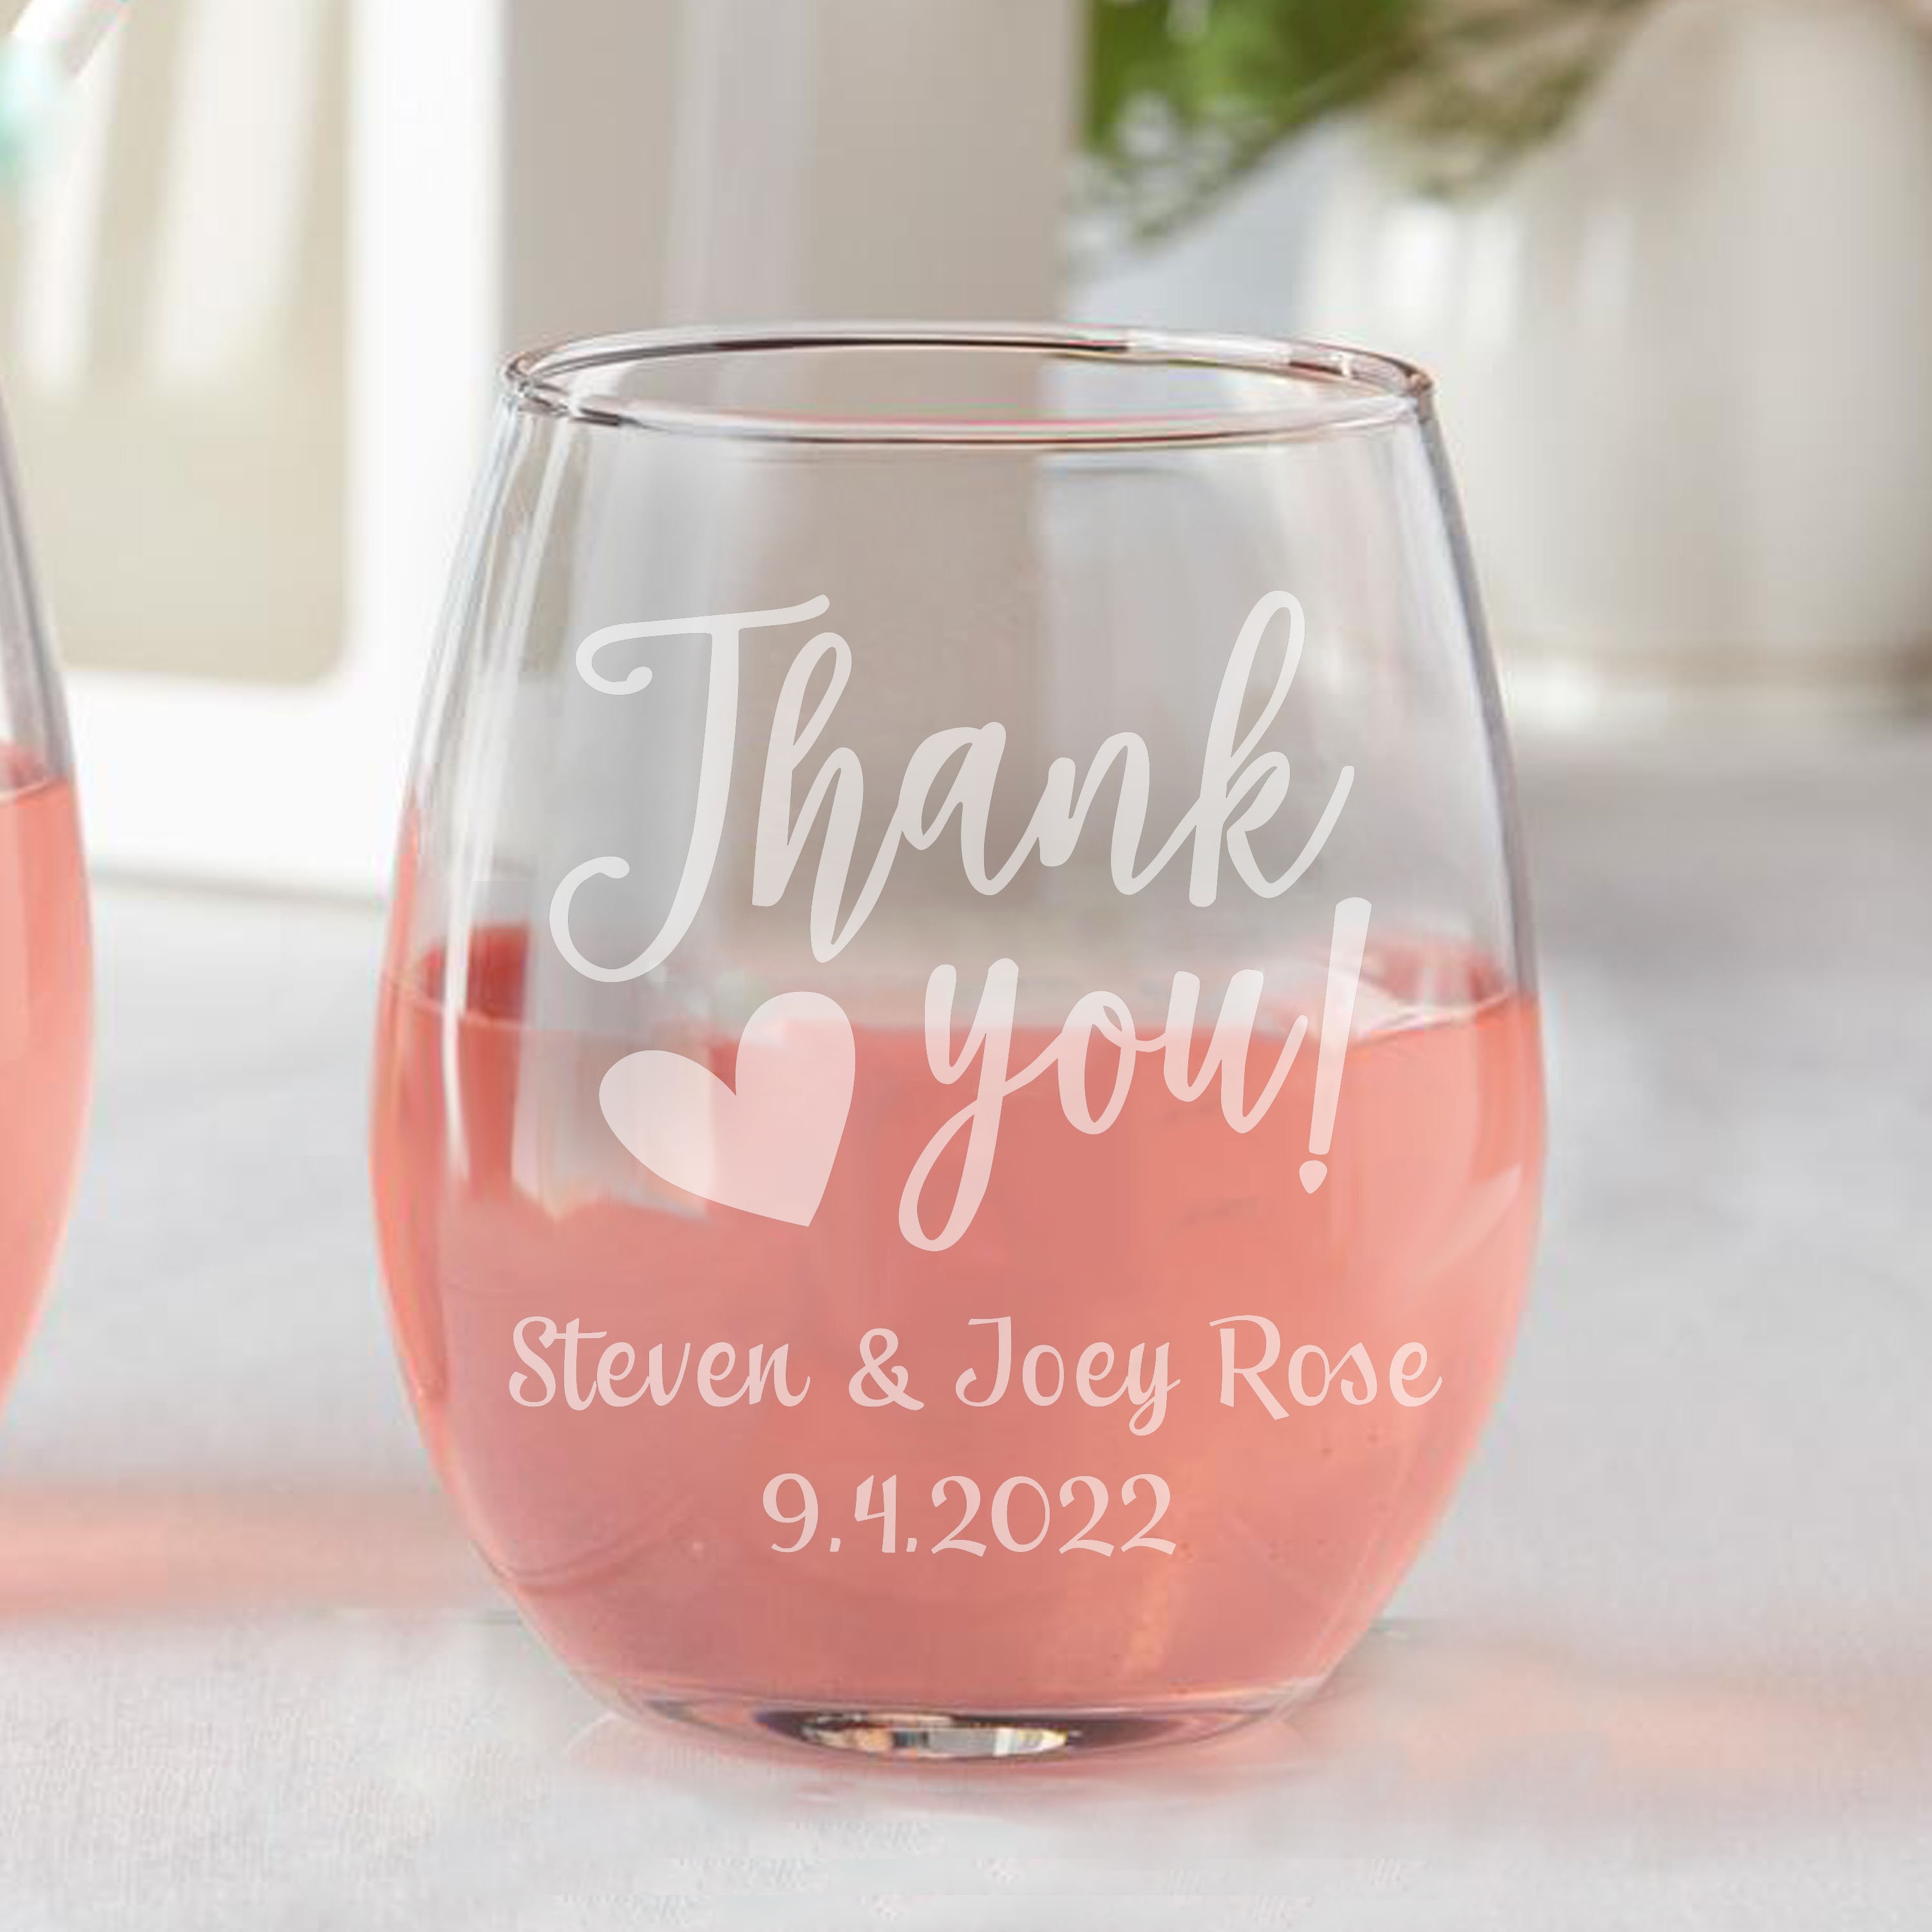 The Boss The Real boss Stemless Wine Glasses Etched Engraved Perfect Fun Handmade Gifts for Everyone Set of 2